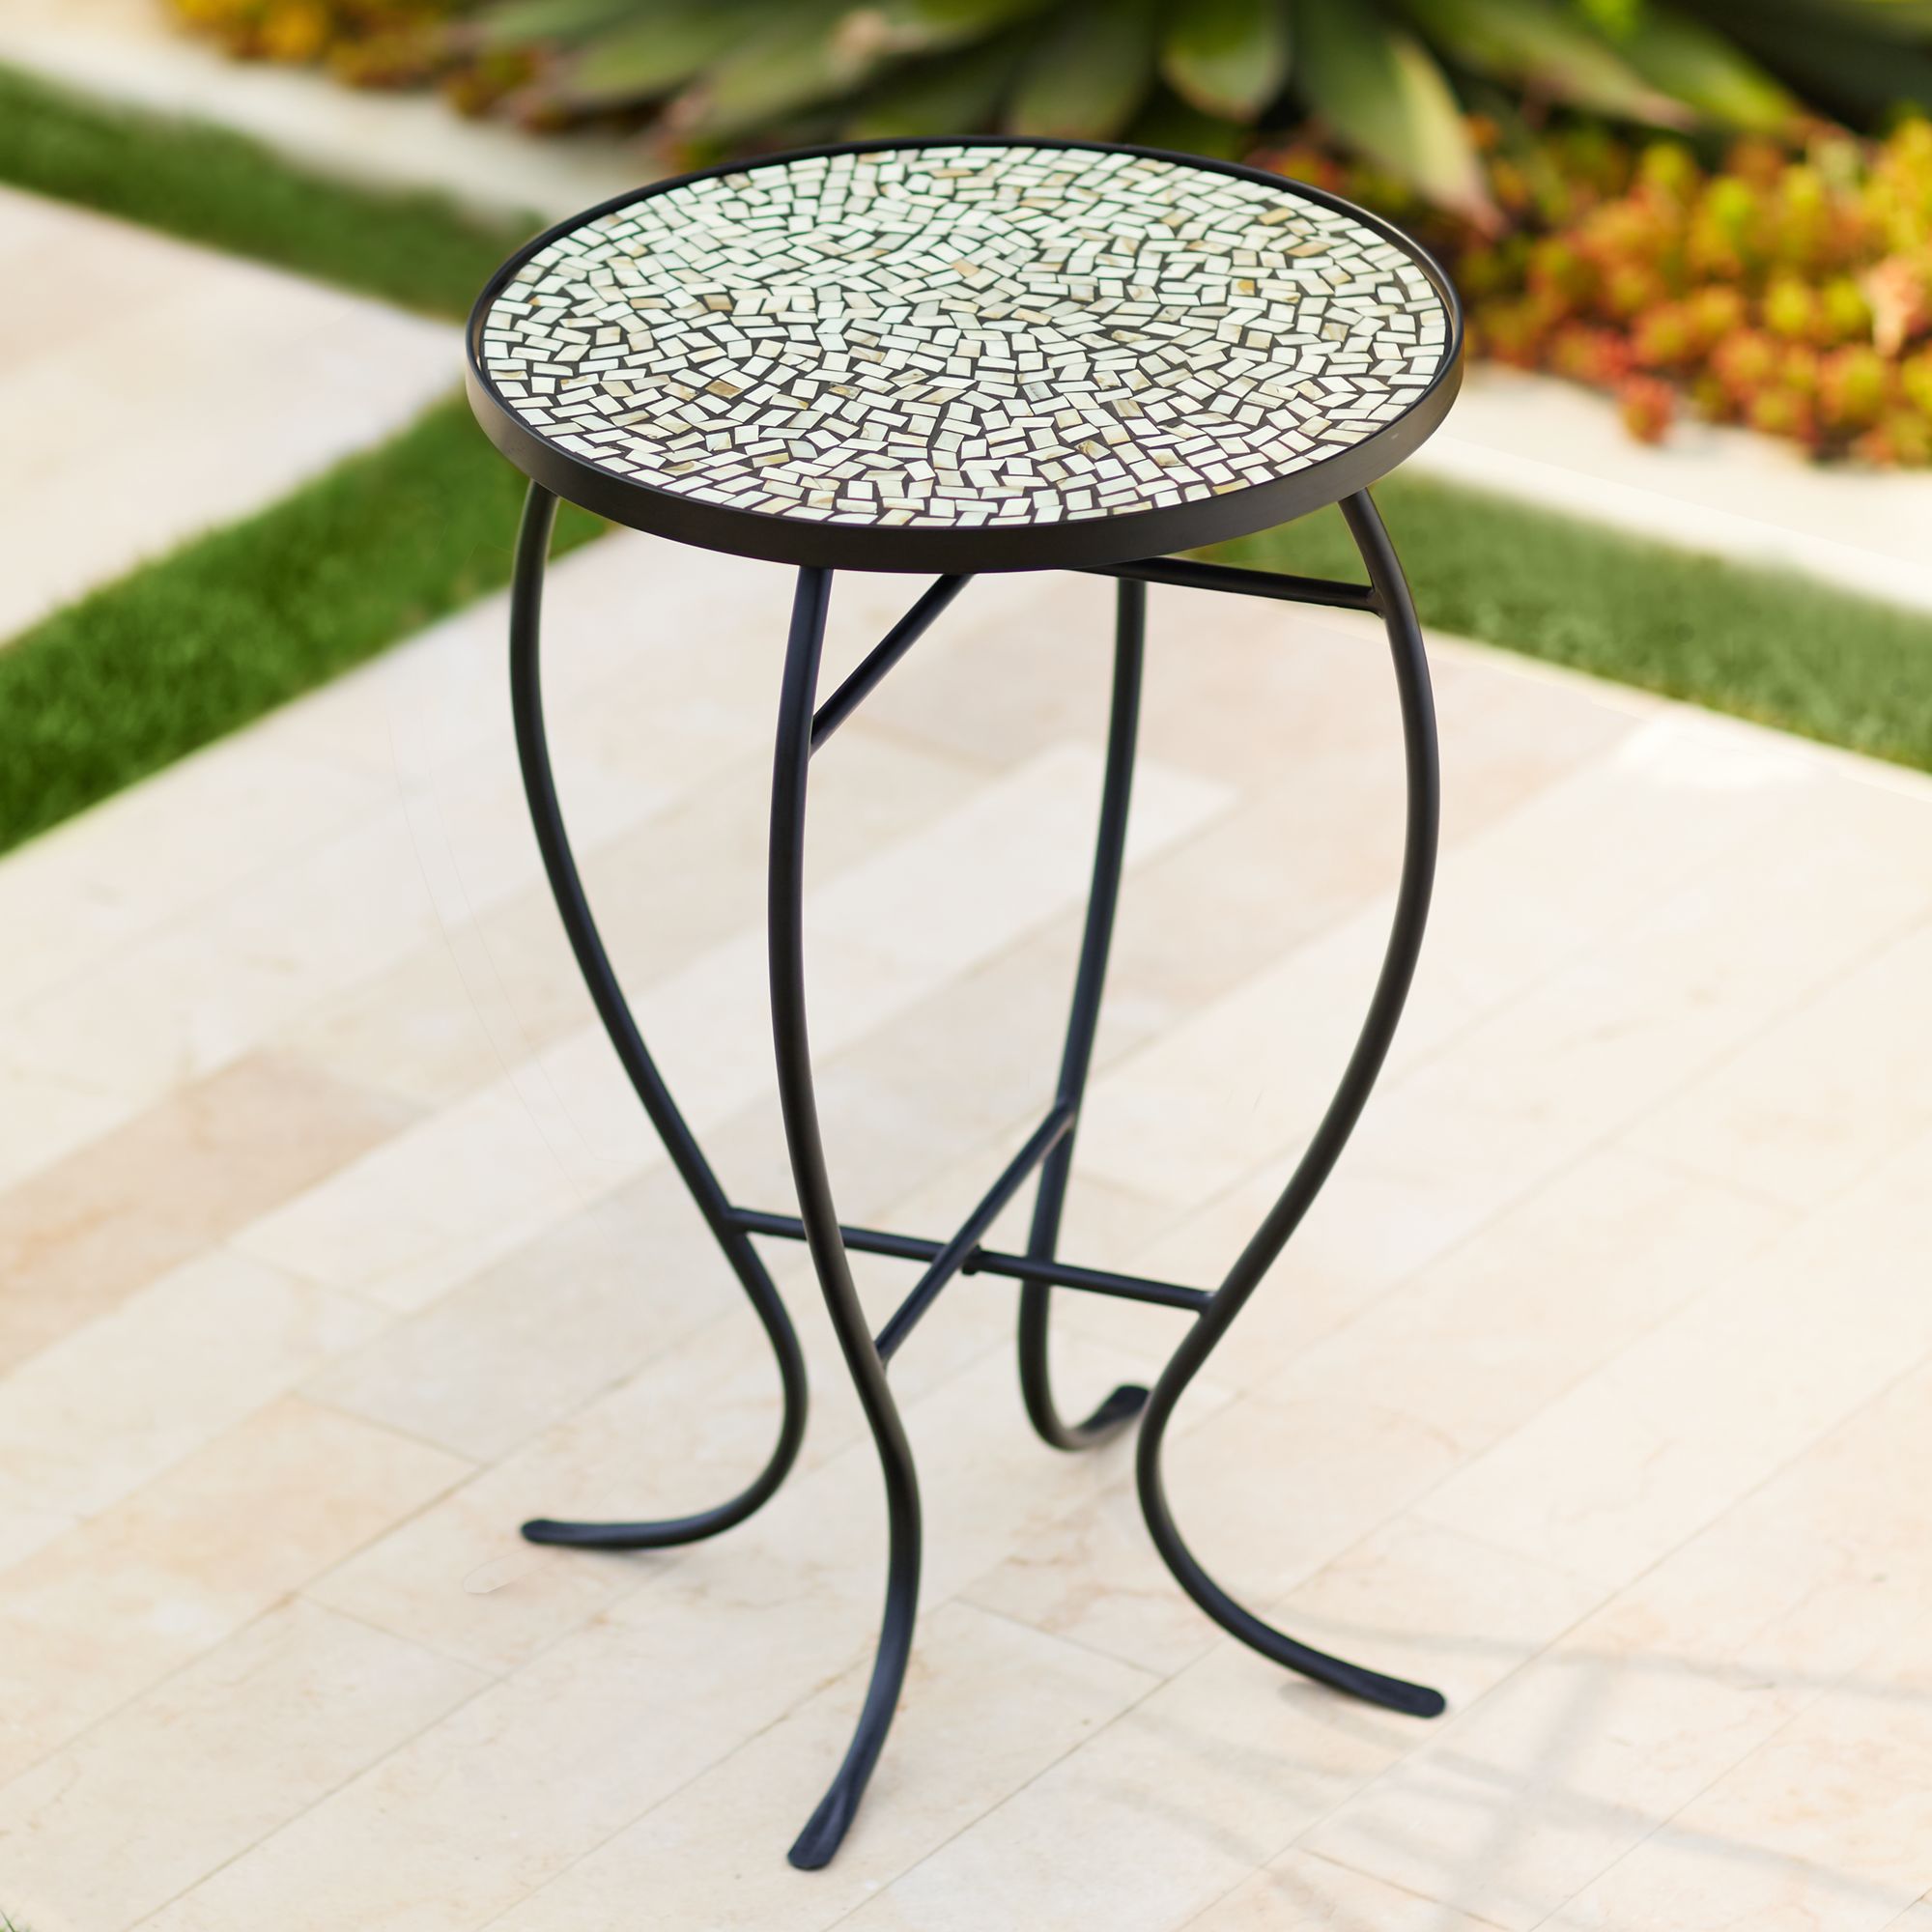 Teal Island Designs Modern Black Round Outdoor Accent Side Table 14" Wide Free-Form Mosaic Tabletop for Front Porch Patio Home House Balcony - image 1 of 7